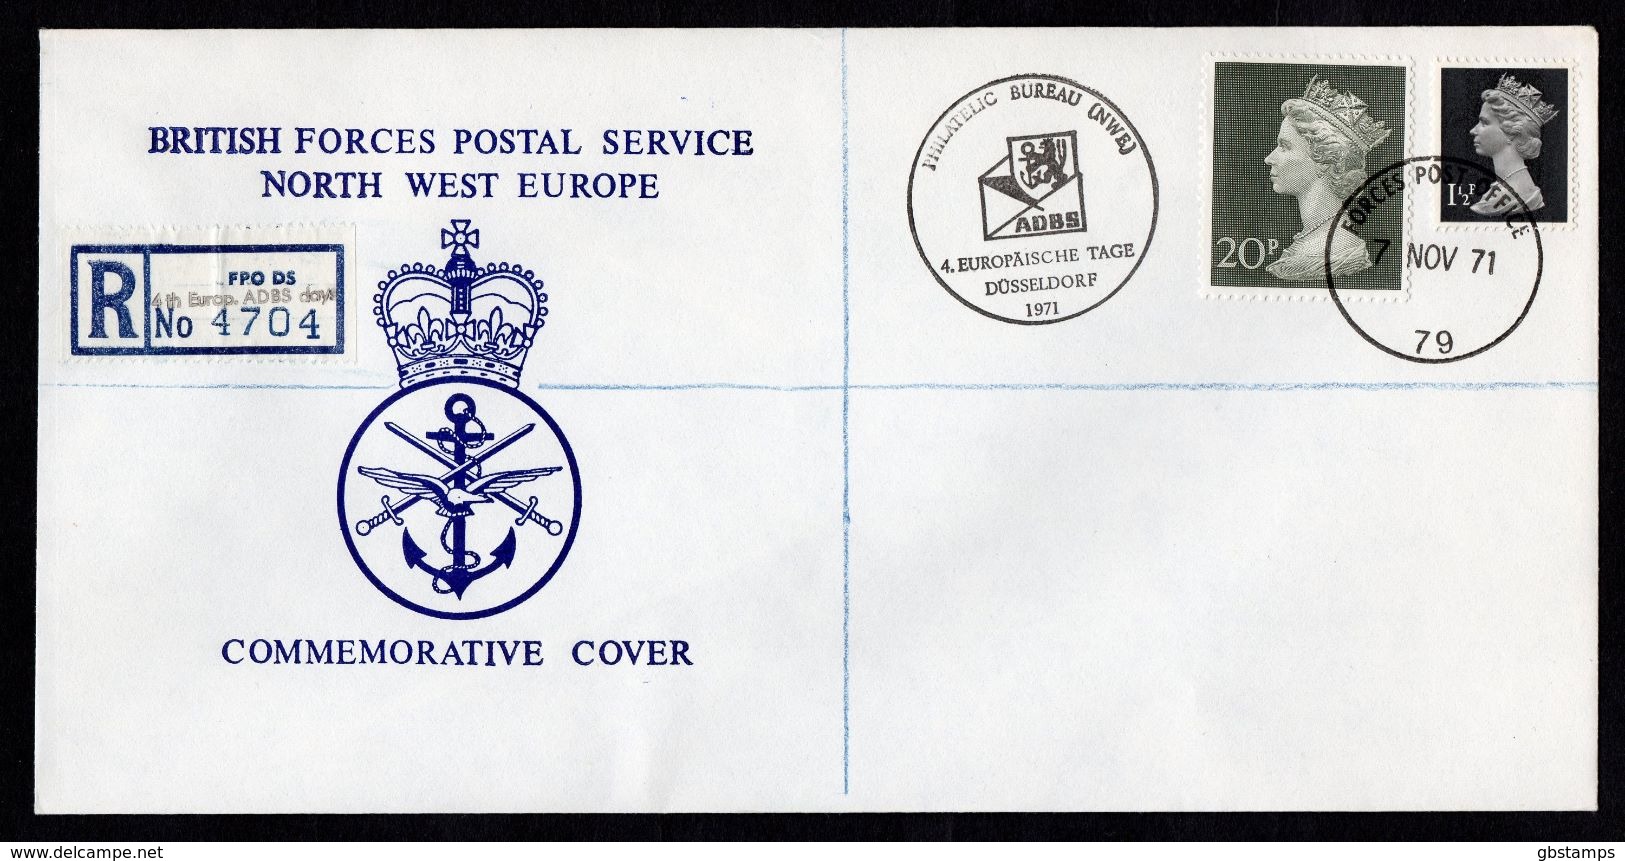 1971 Britihsh Forces Postal Service North West Europe Registered Souvenir Cover With BFPO 79 Cancel See Scan - Covers & Documents